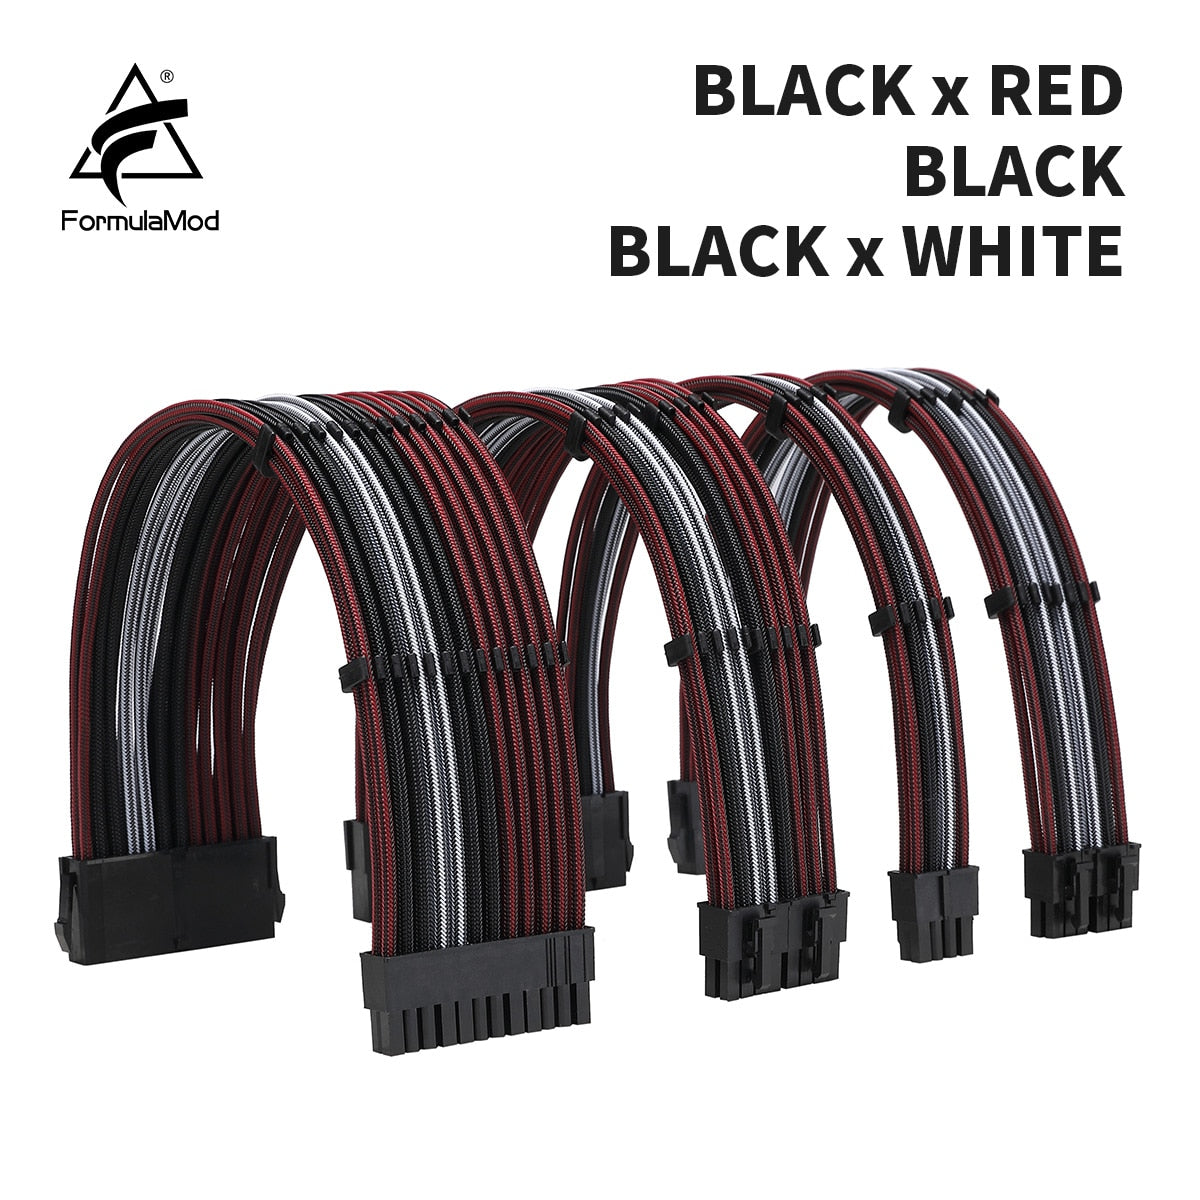 FormulaMod NCK3 Series PSU Extension Cable Kit , Solid/Mix Color Cable Mix Combo 300mm ATX24Pin PCI-E8Pin CPU8Pin With Combs